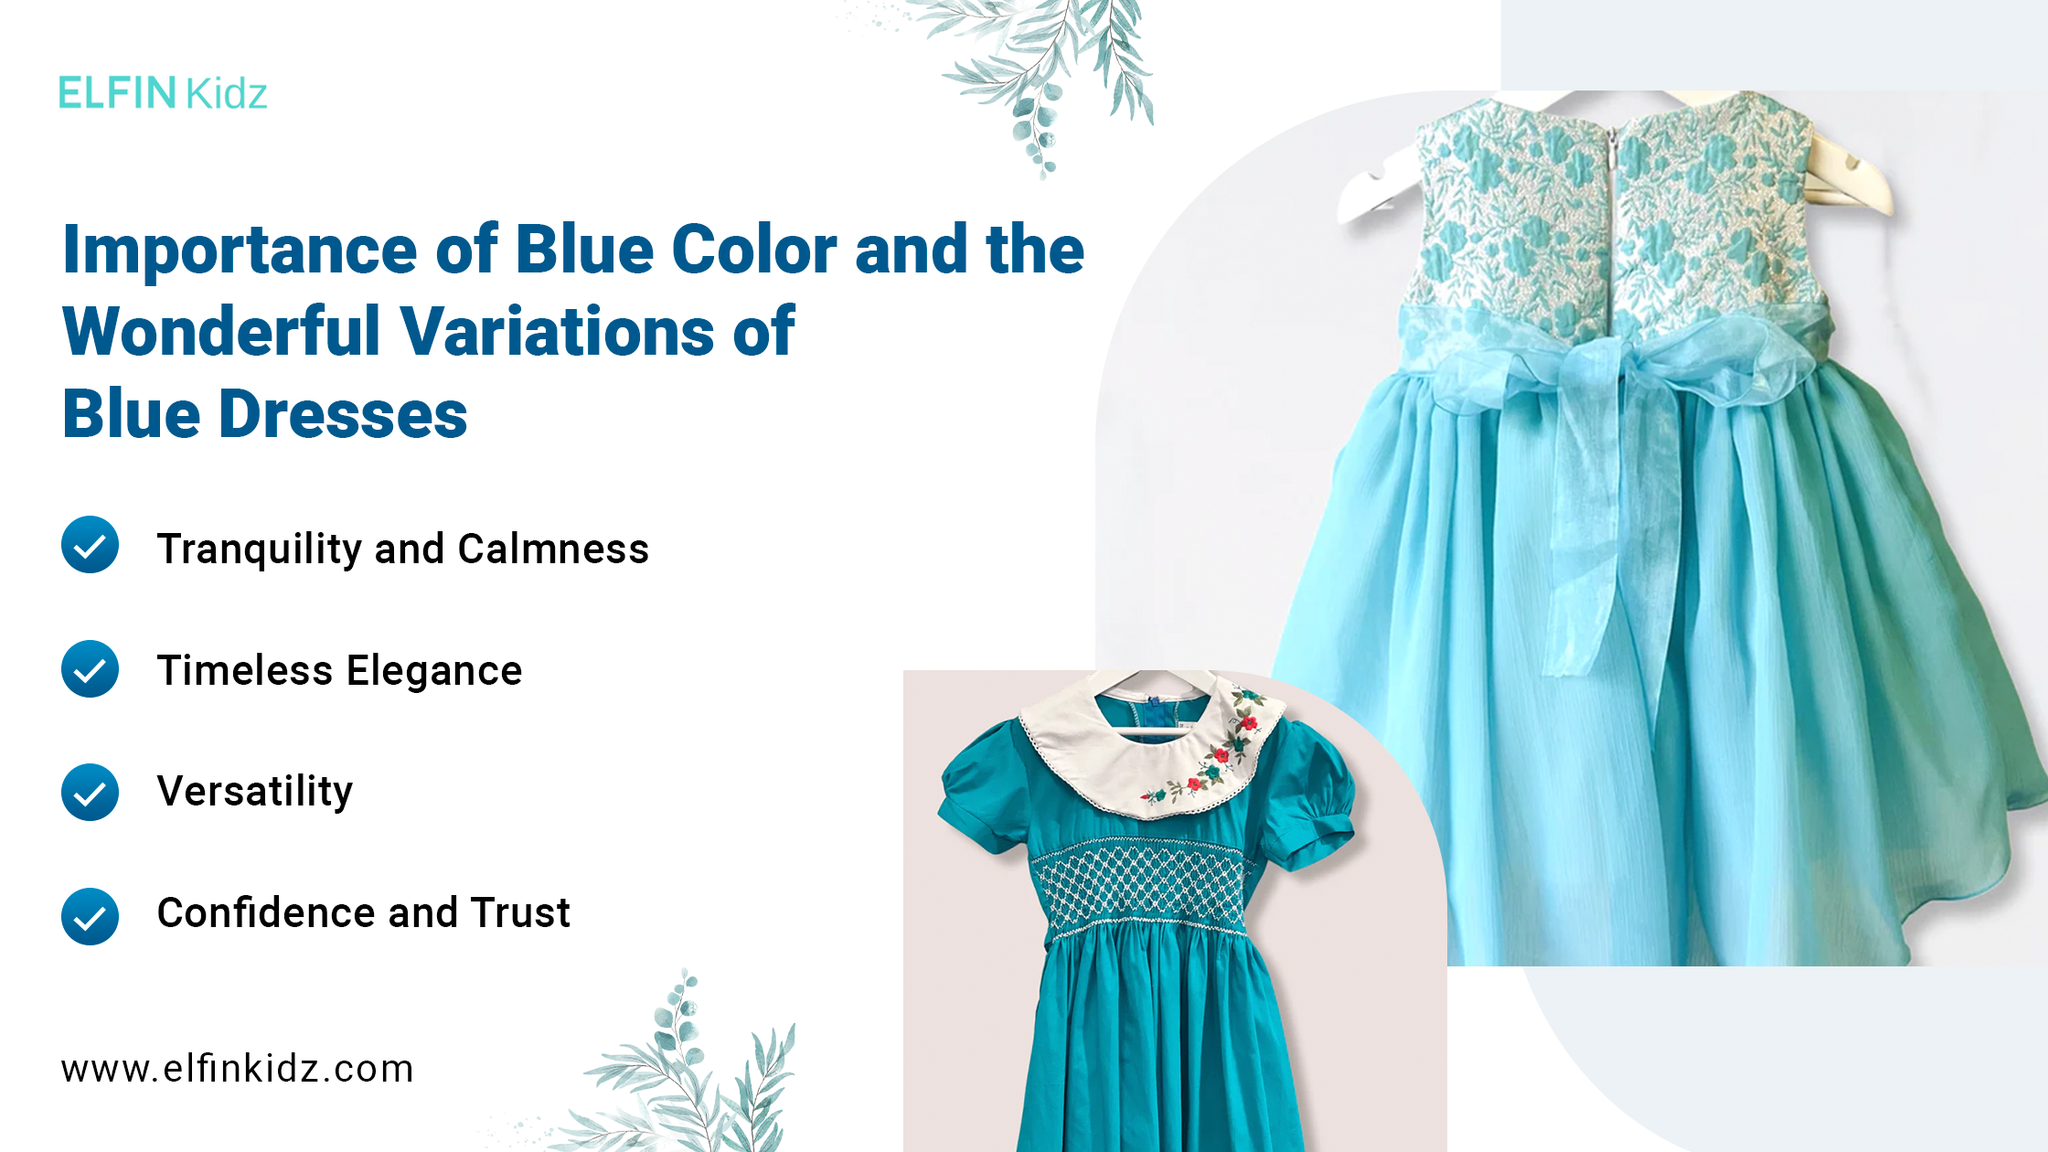 Importance of Blue Color and the Wonderful Variations of Blue Dresses